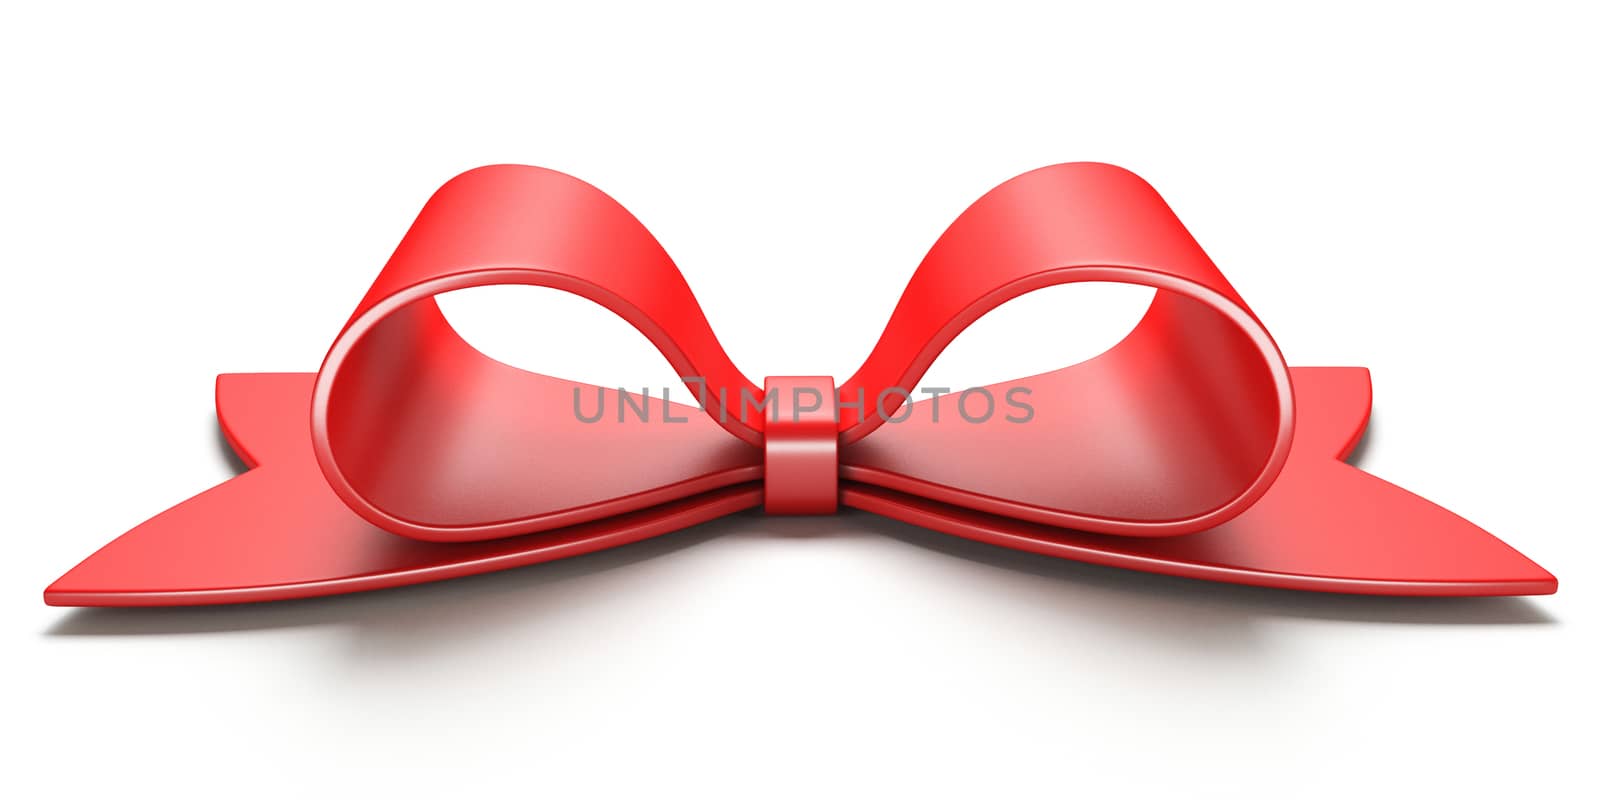 Red gift ribbon bow 3D rendering illustration isolated on white background